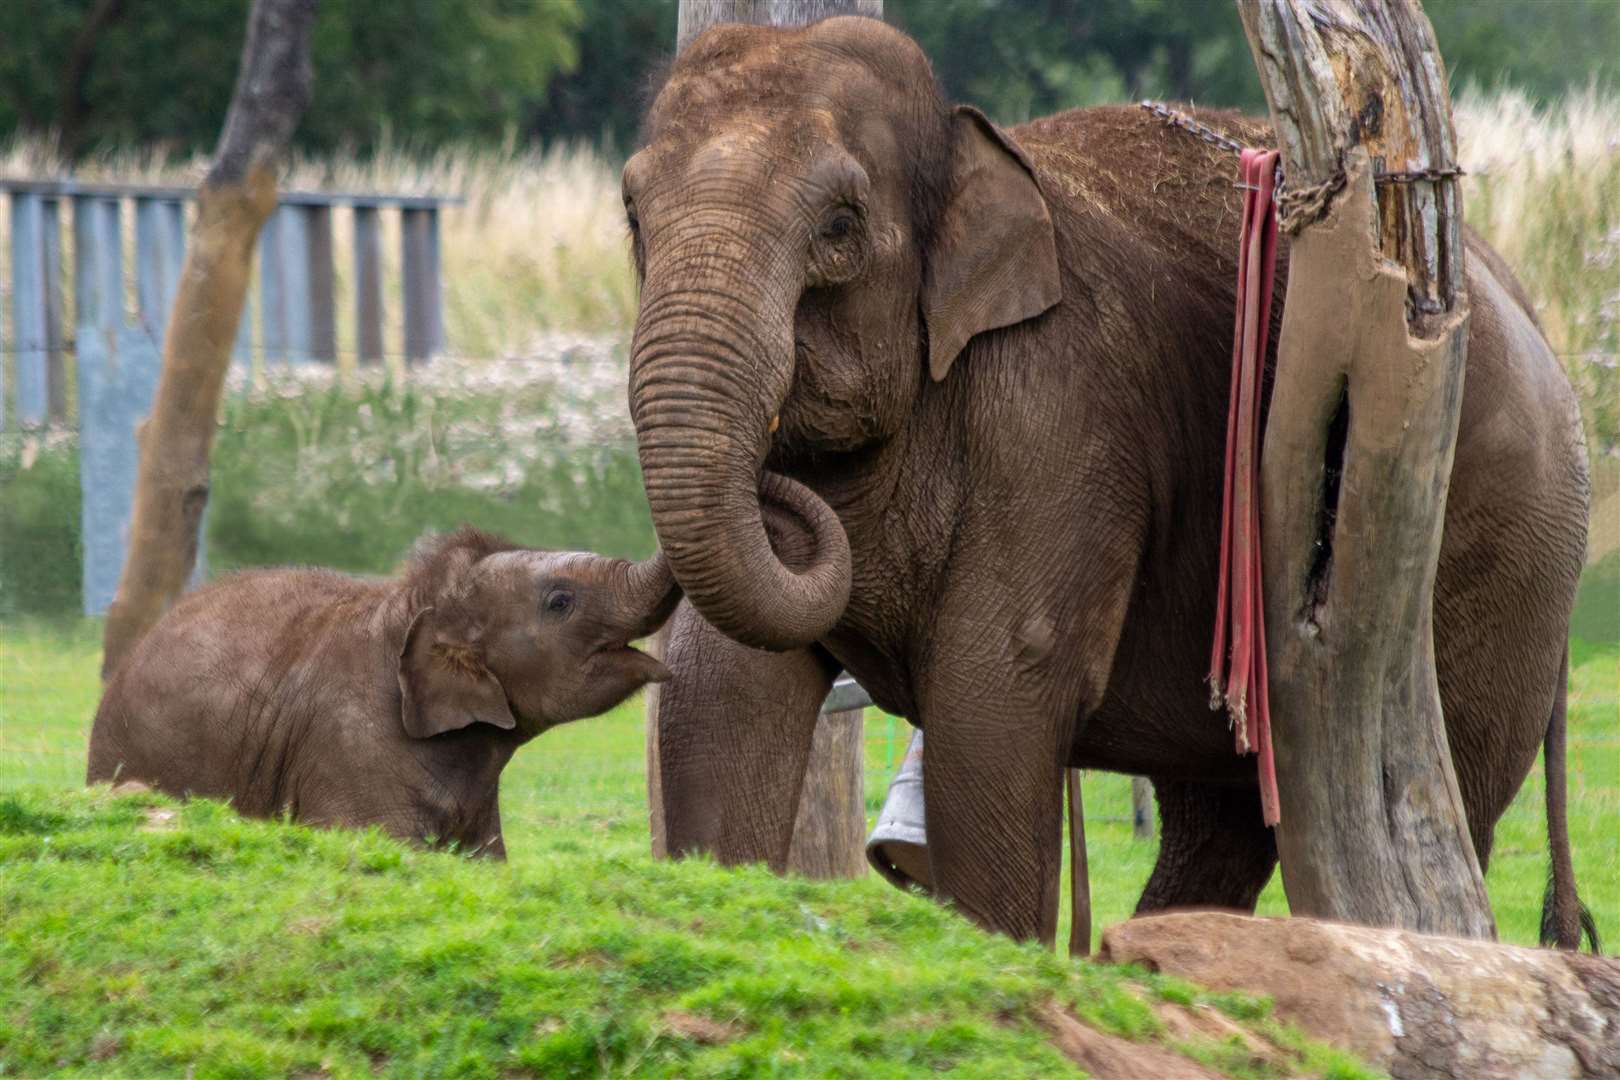 Elephant keeper Stefan Groeneveld explained the zoo is using night-vision cameras to provide 24-hour care for the herd (Whipsnade Zoo/PA)